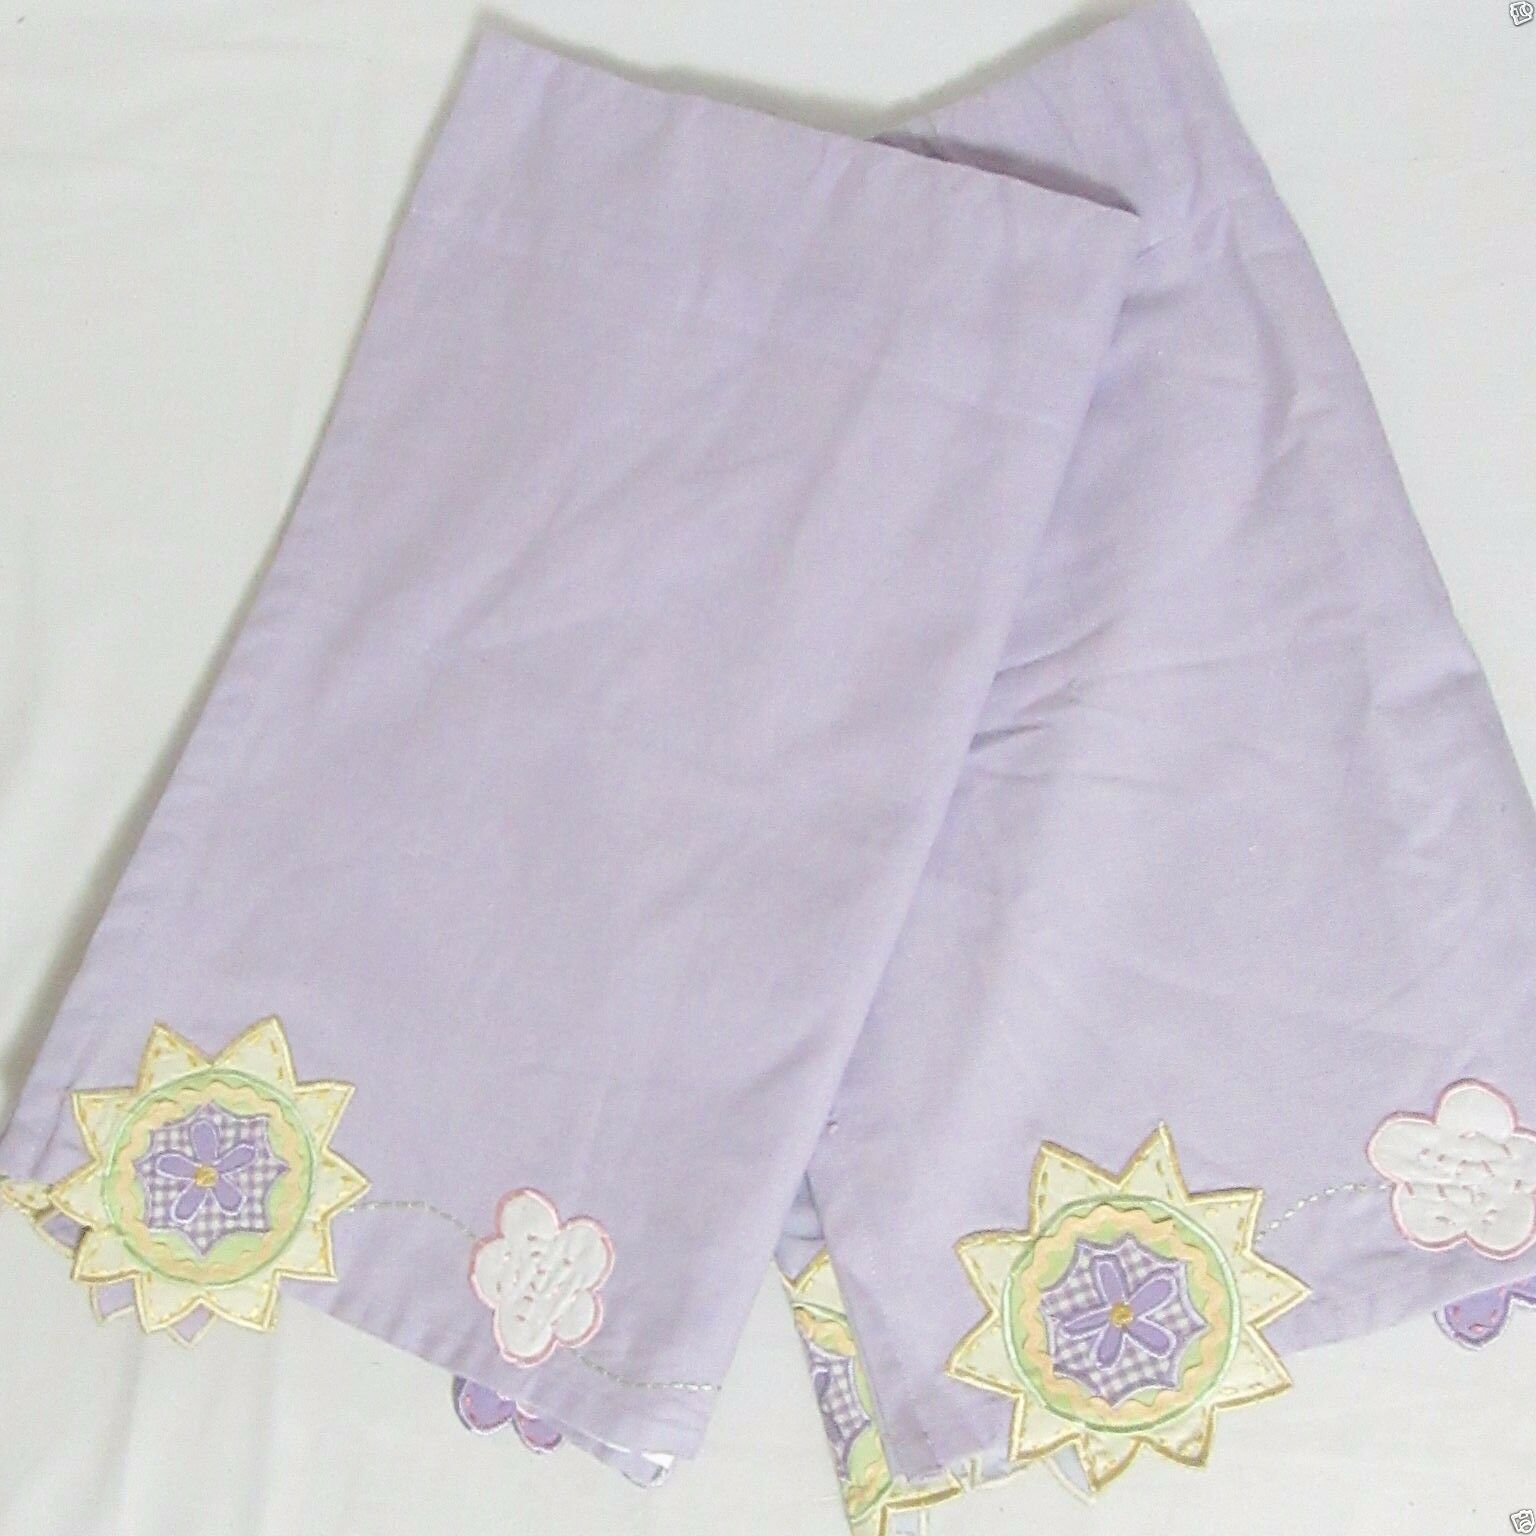 Pottery Barn Kids Floral Sun and Clouds Embroidered Lavender 2-PC Valance Set(s) - $32.00